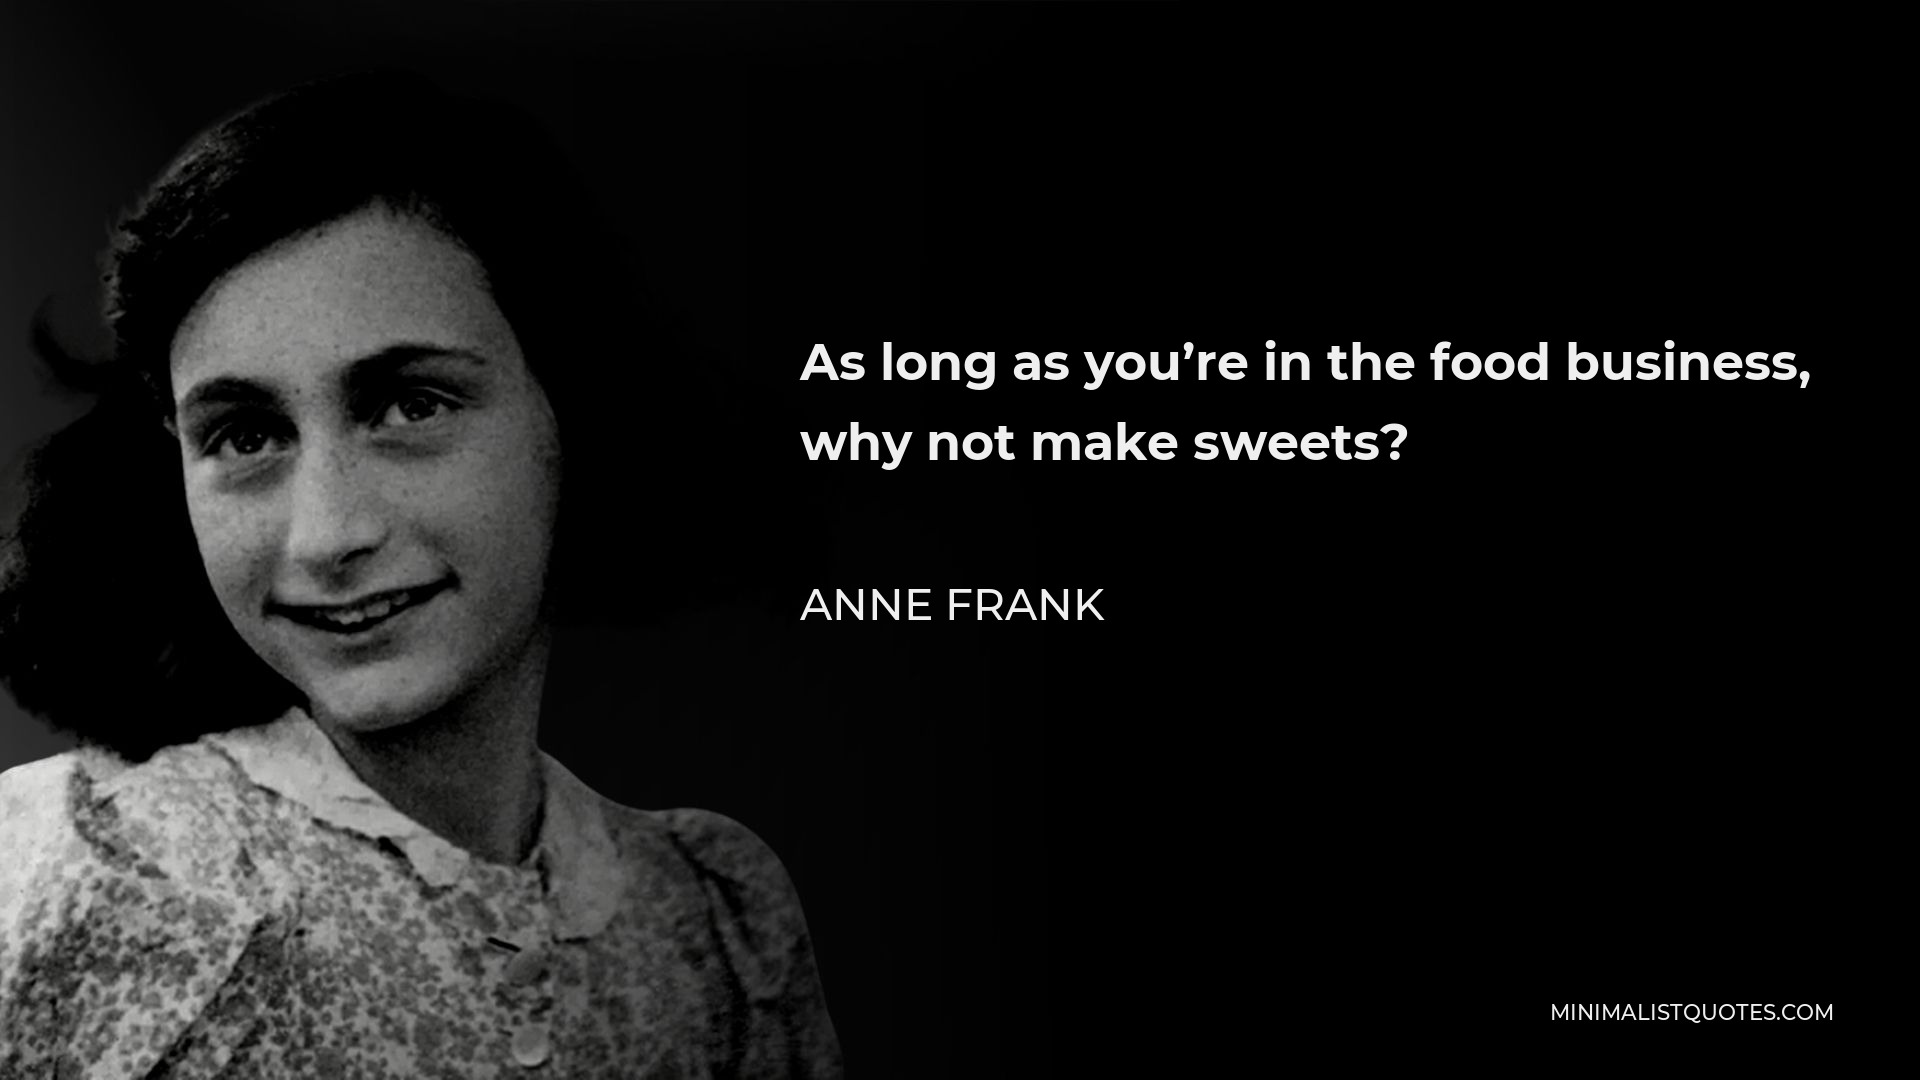 Anne Frank Quote - As long as you’re in the food business, why not make sweets?